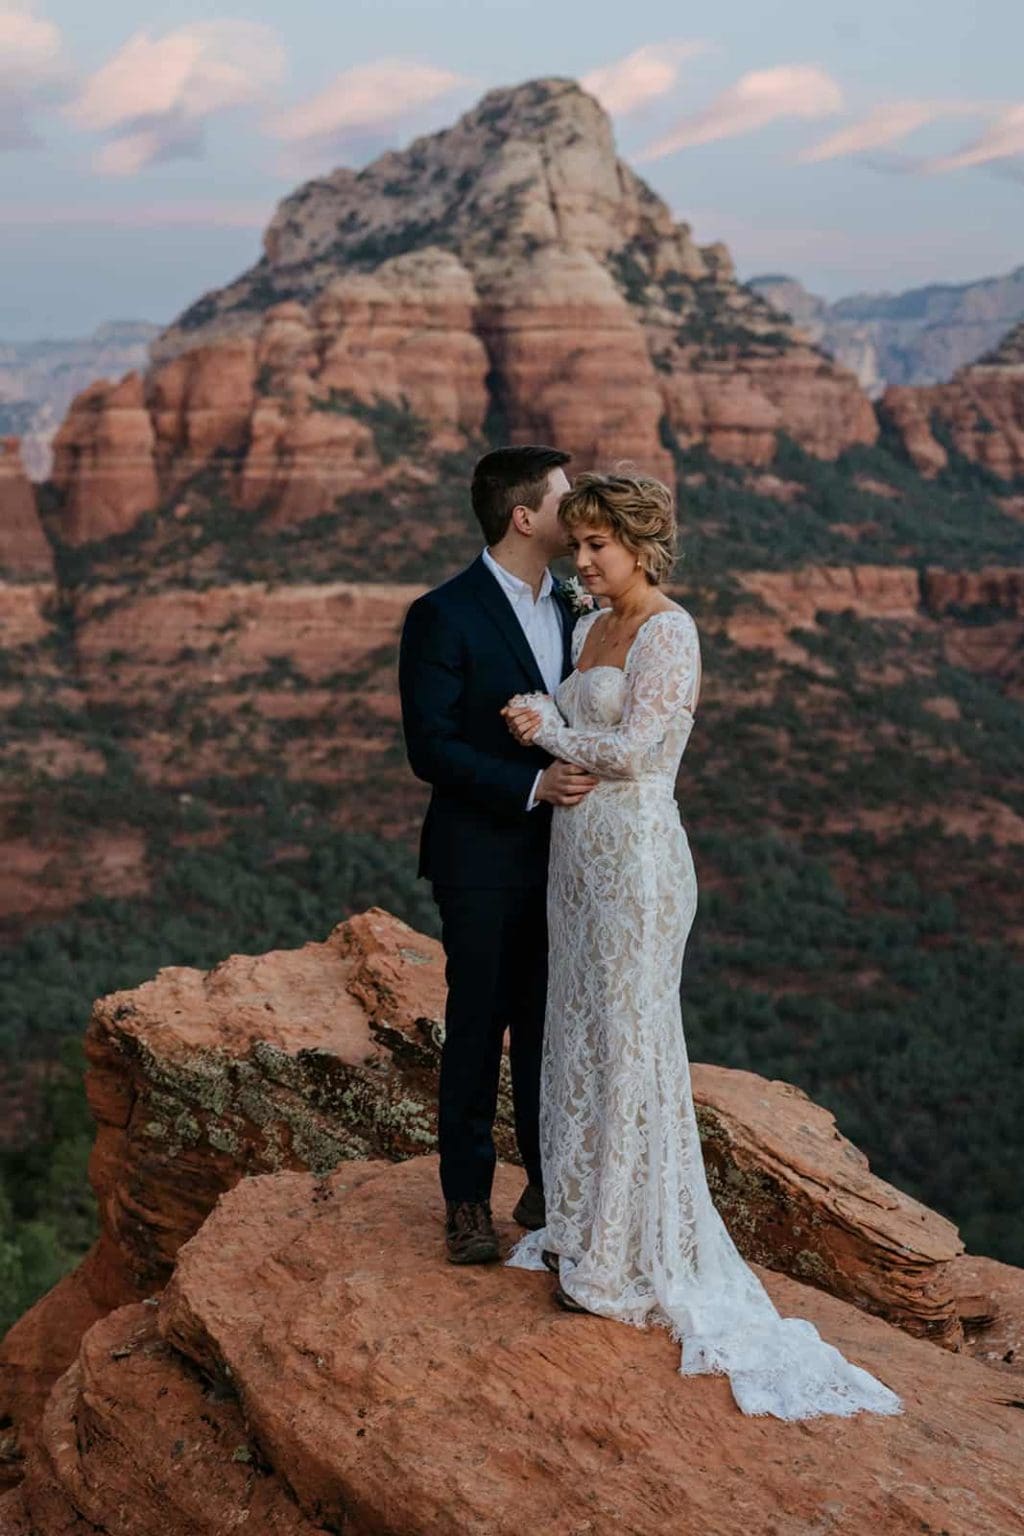 A couple stands together at sunrise in the red rocks.